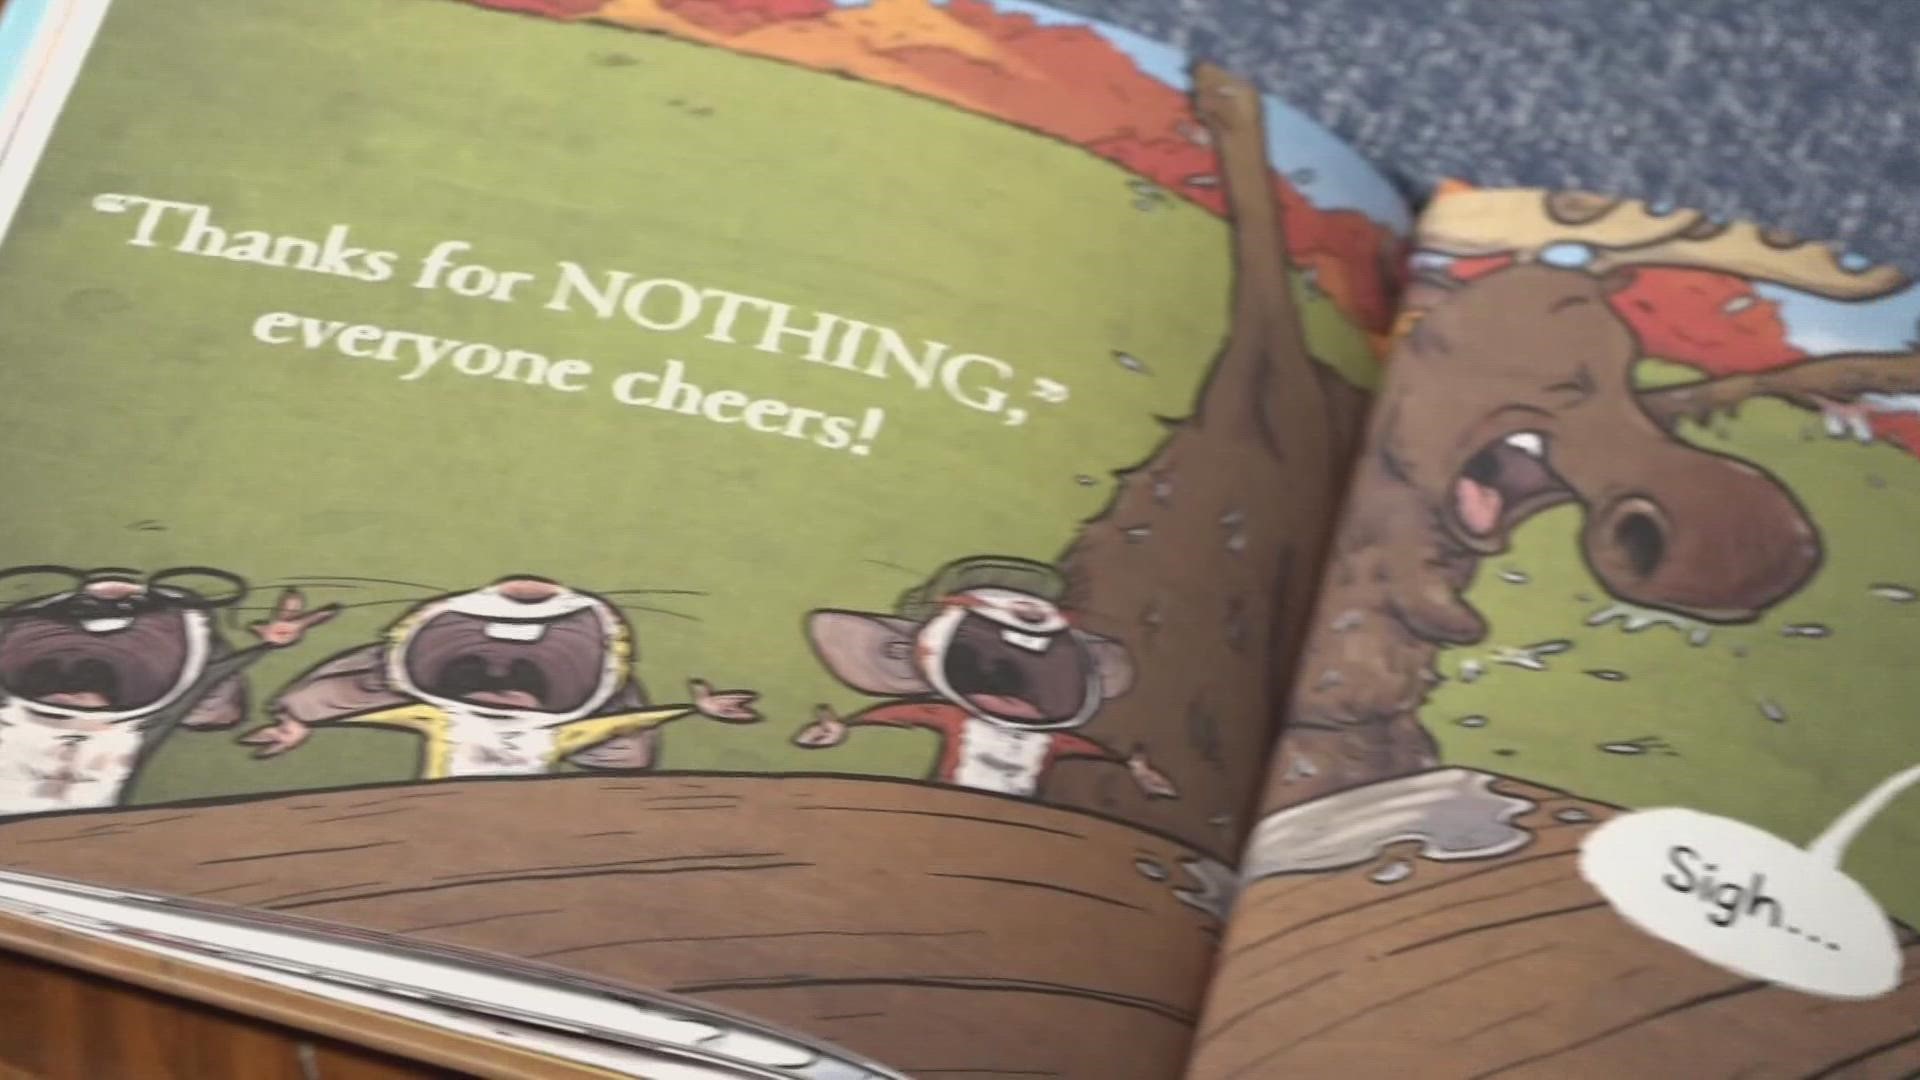 Ryan T. Higgins has released two new children's books: 'Norman Didn't Do It (Yes He Did)' and 'Thanks For Nothing'